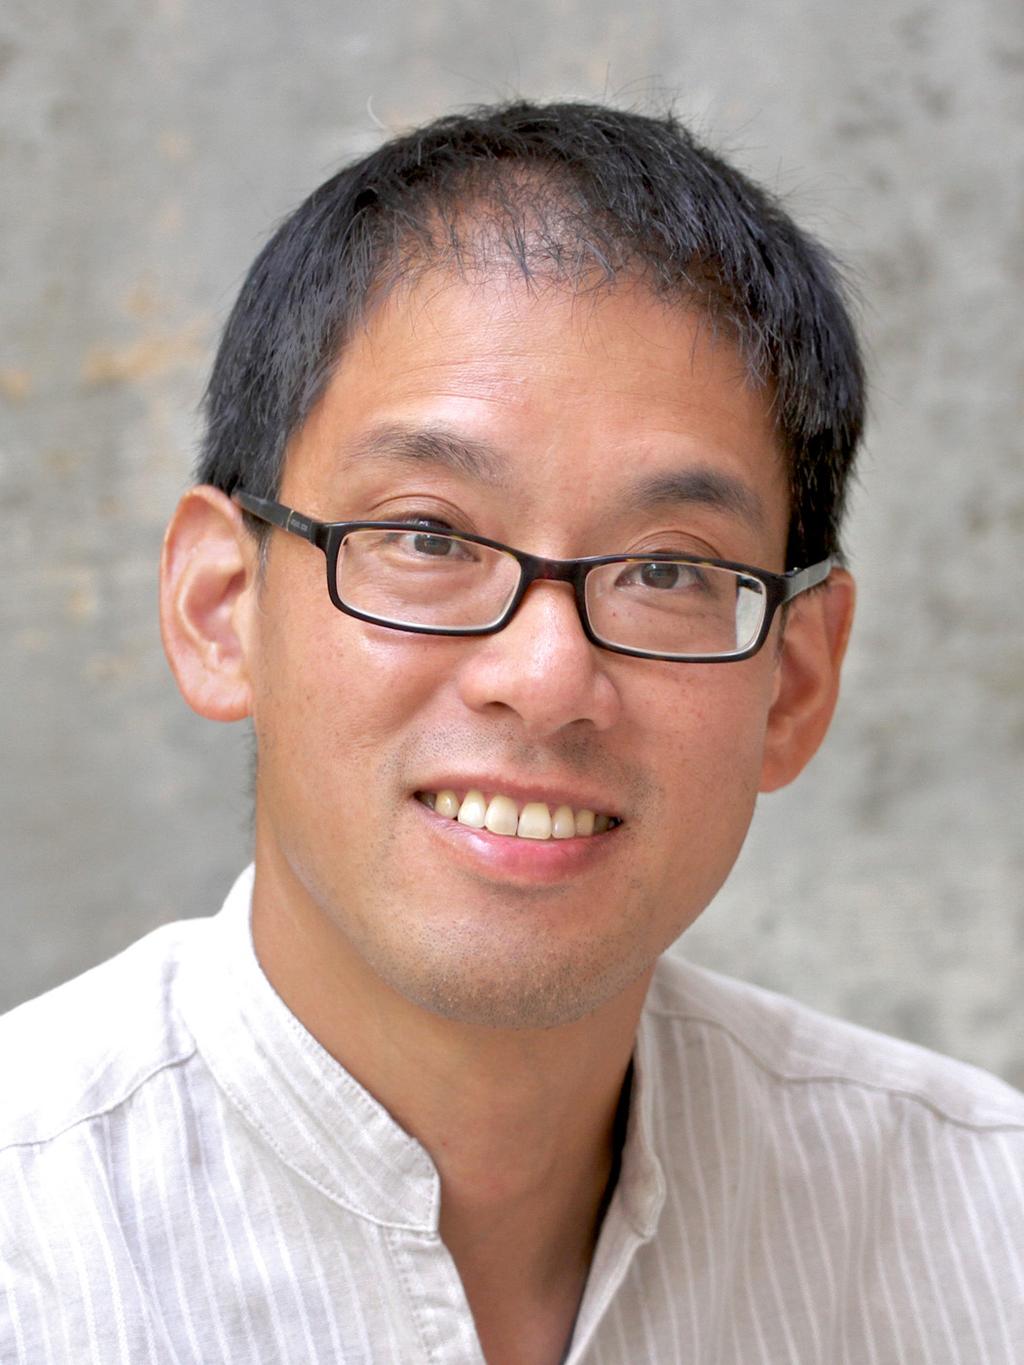 Author s Biography Matthew Shum received his Ph.D. in Economics from Stanford University in 1998.